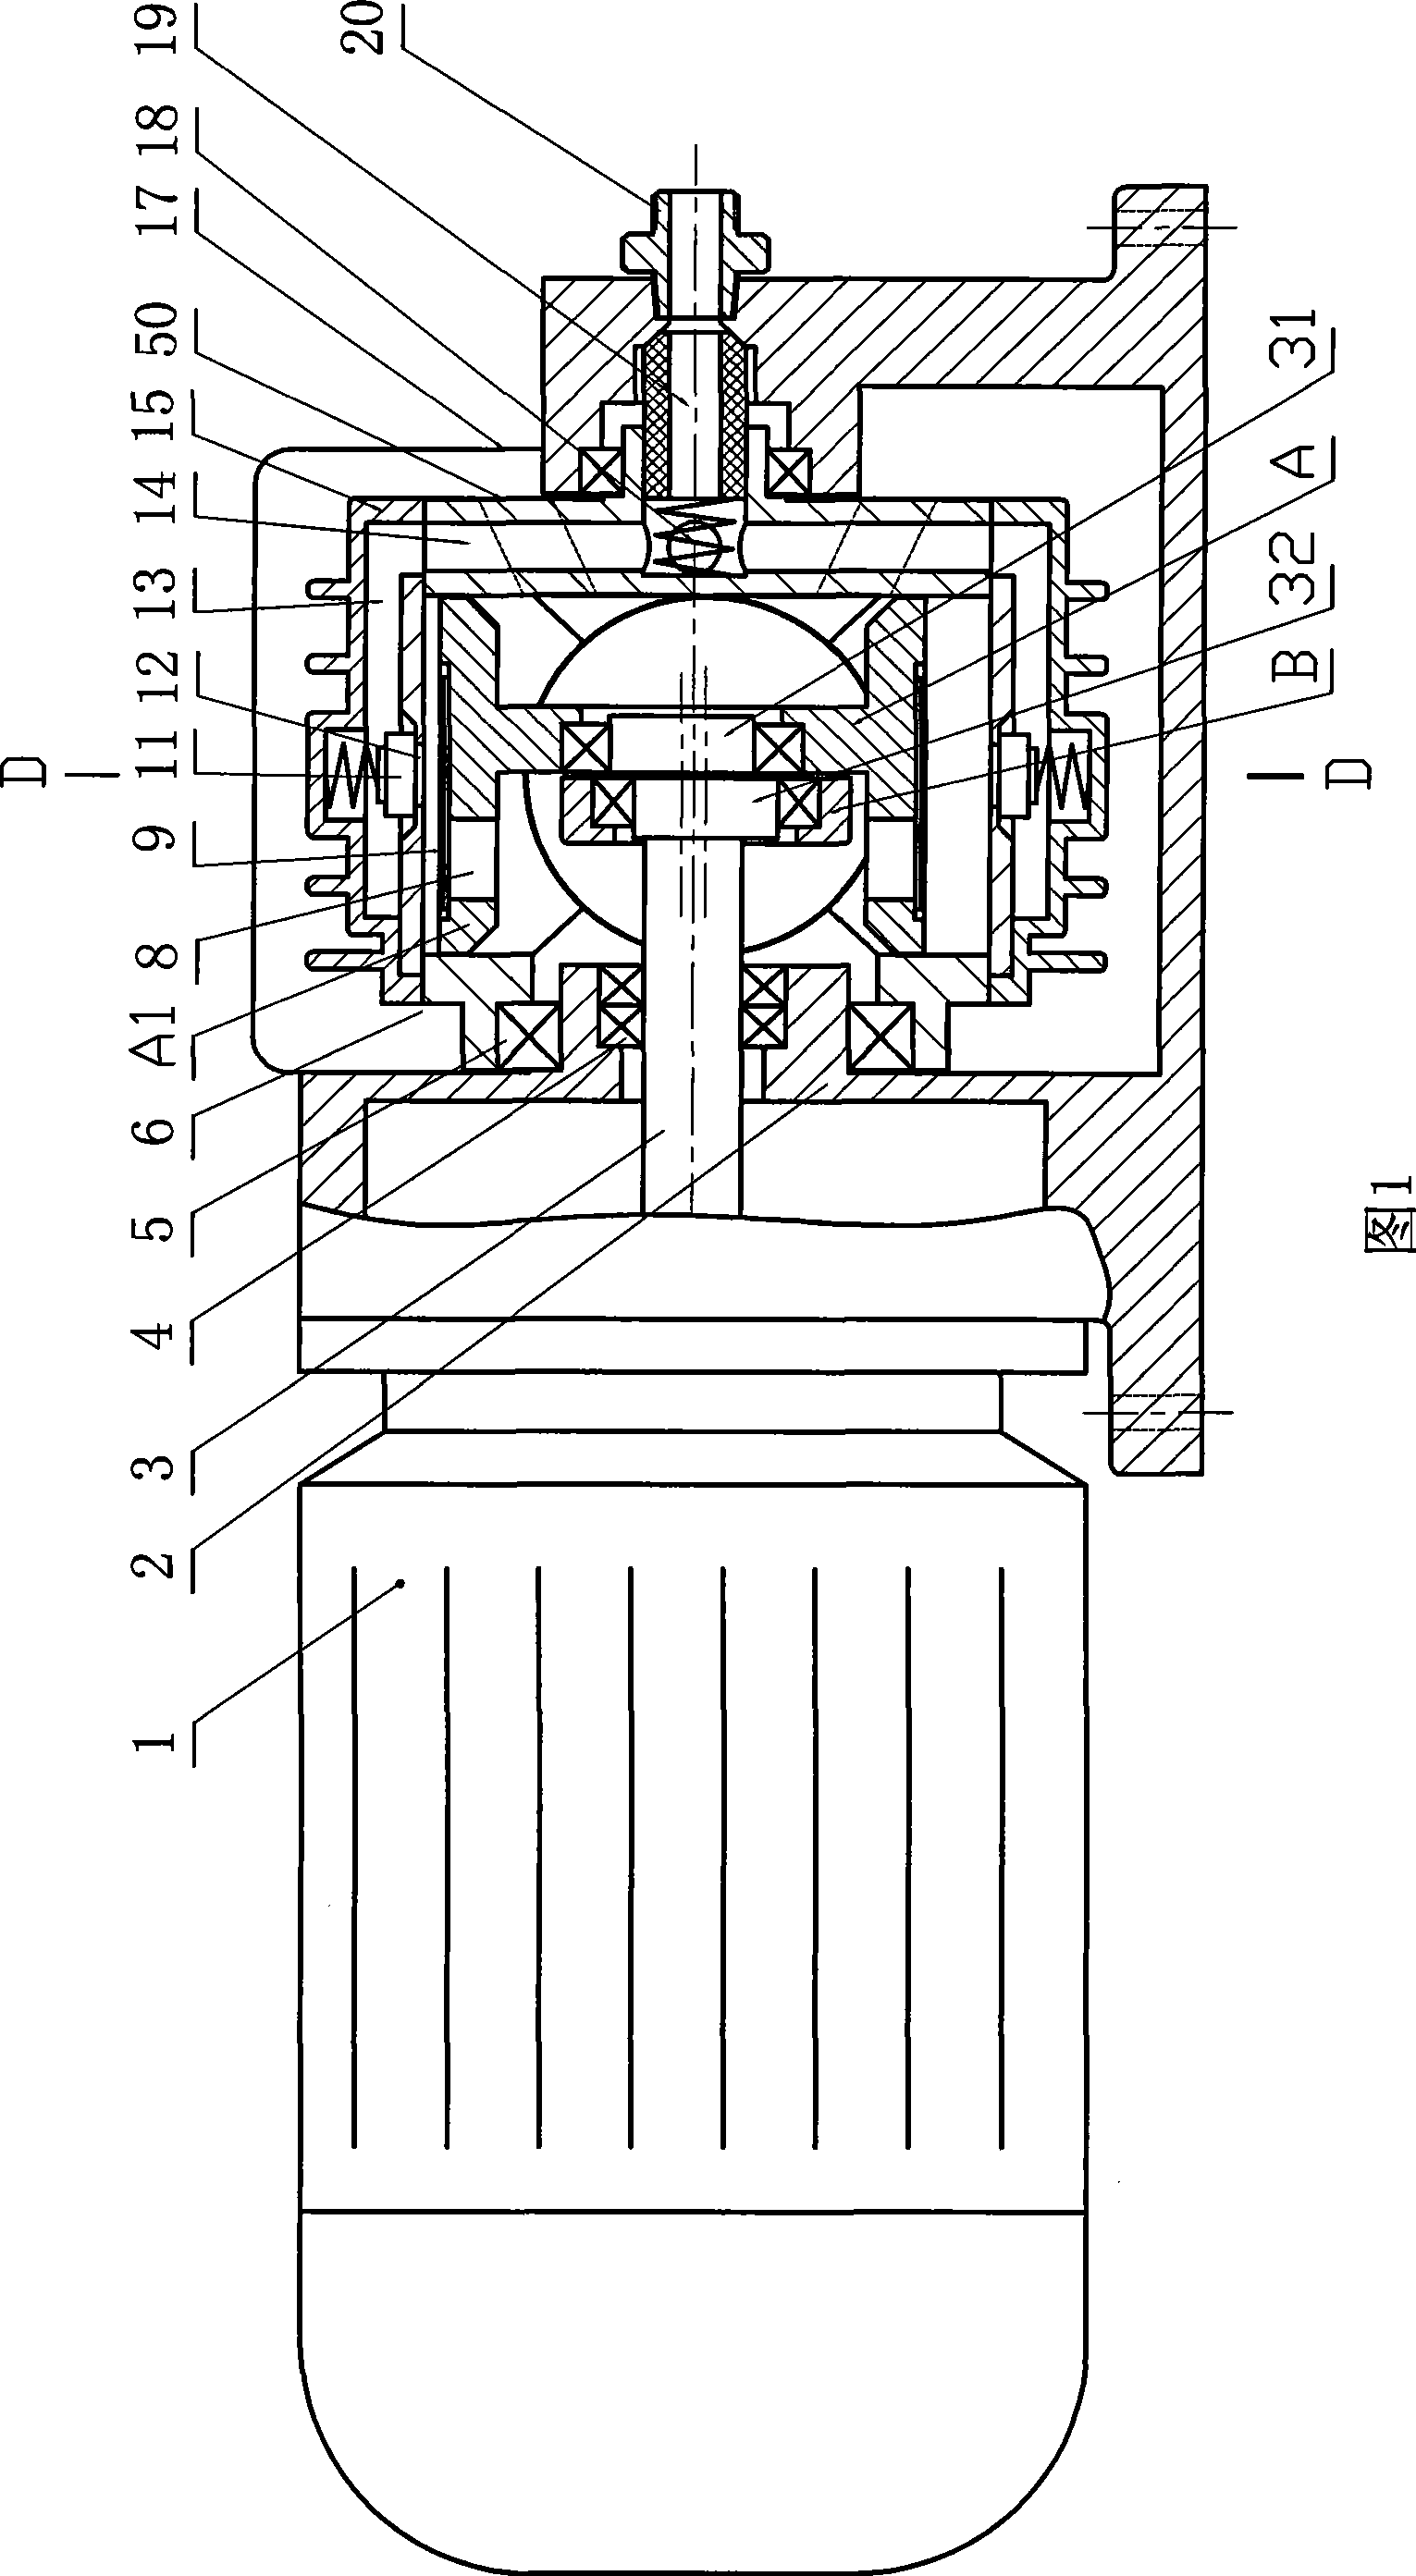 Radial multi-cylinder synchronous revolving compressor